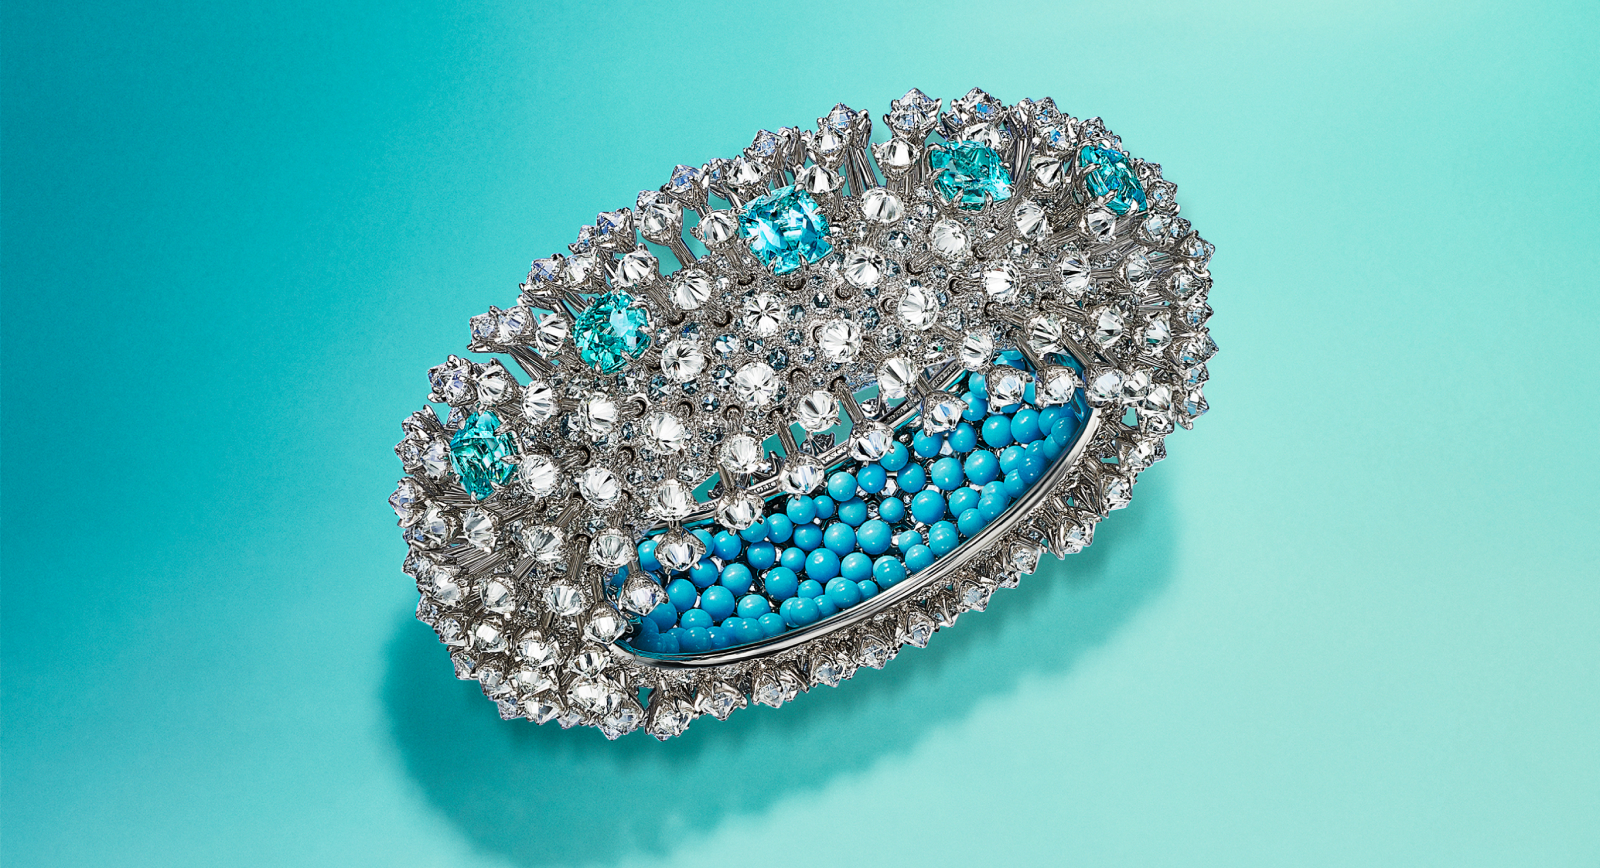 Tiffany & Co. Sea Anemone bracelet in 18k white gold with blue cuprian elbaite tourmalines of over 9 total carats, turquoise and diamonds from the 2023 Blue Book High Jewellery collection